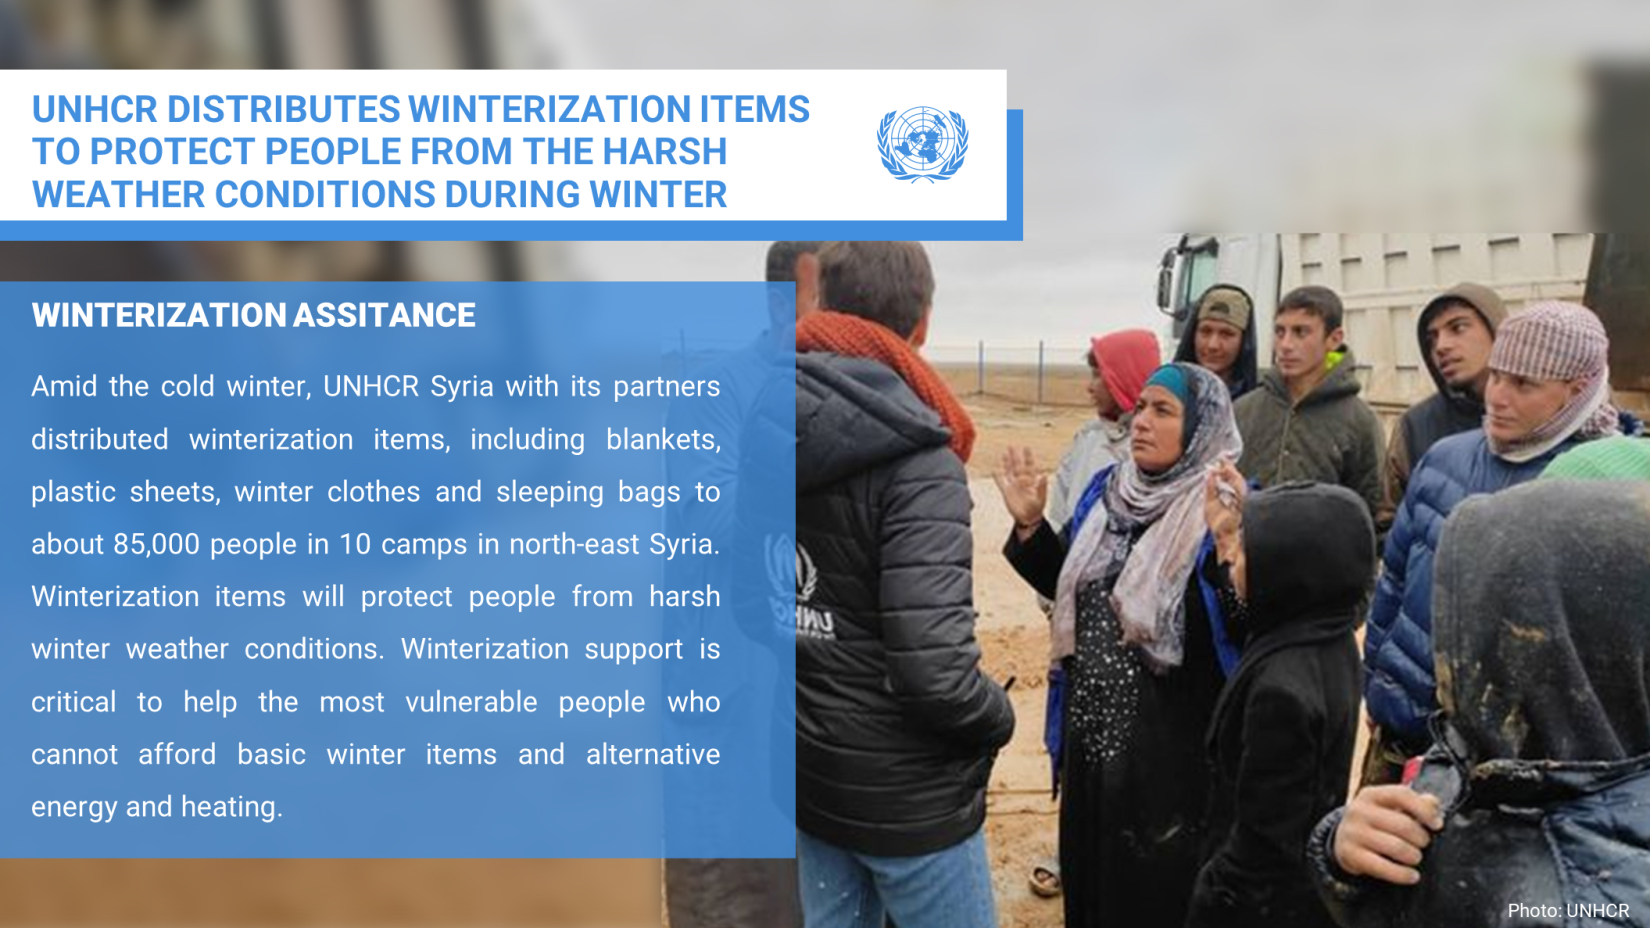 UNHCR DISTRIBUTES WINTERIZATION ITEMS TO PROTECT PEOPLE FROM THE HARSH WEATHER CONDITIONS DURING WINTER